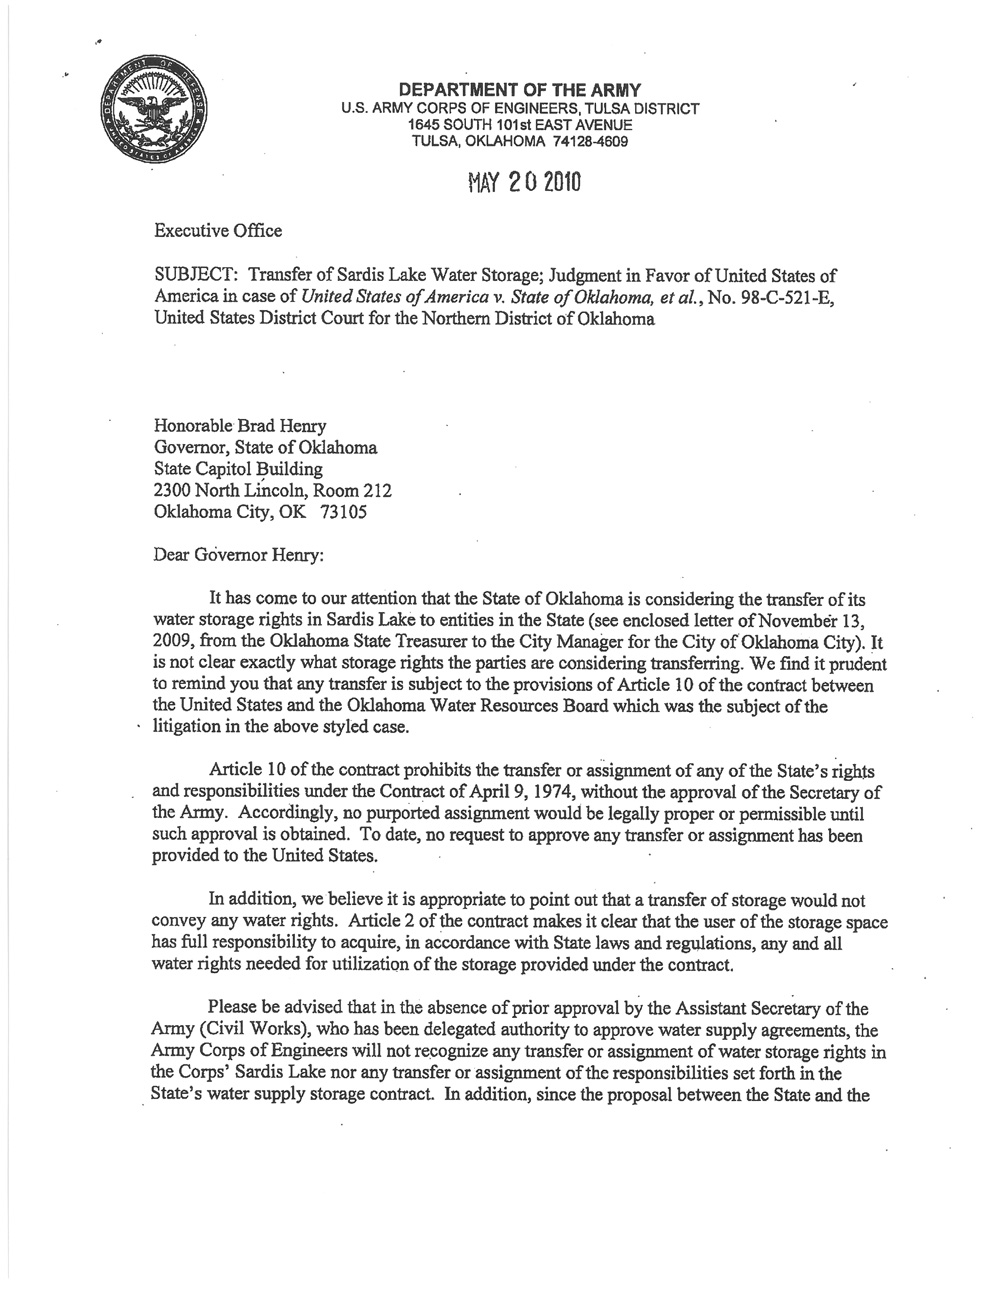 army-letter-of-reprimand-template-letter-from-the-u-s-army-corps-of